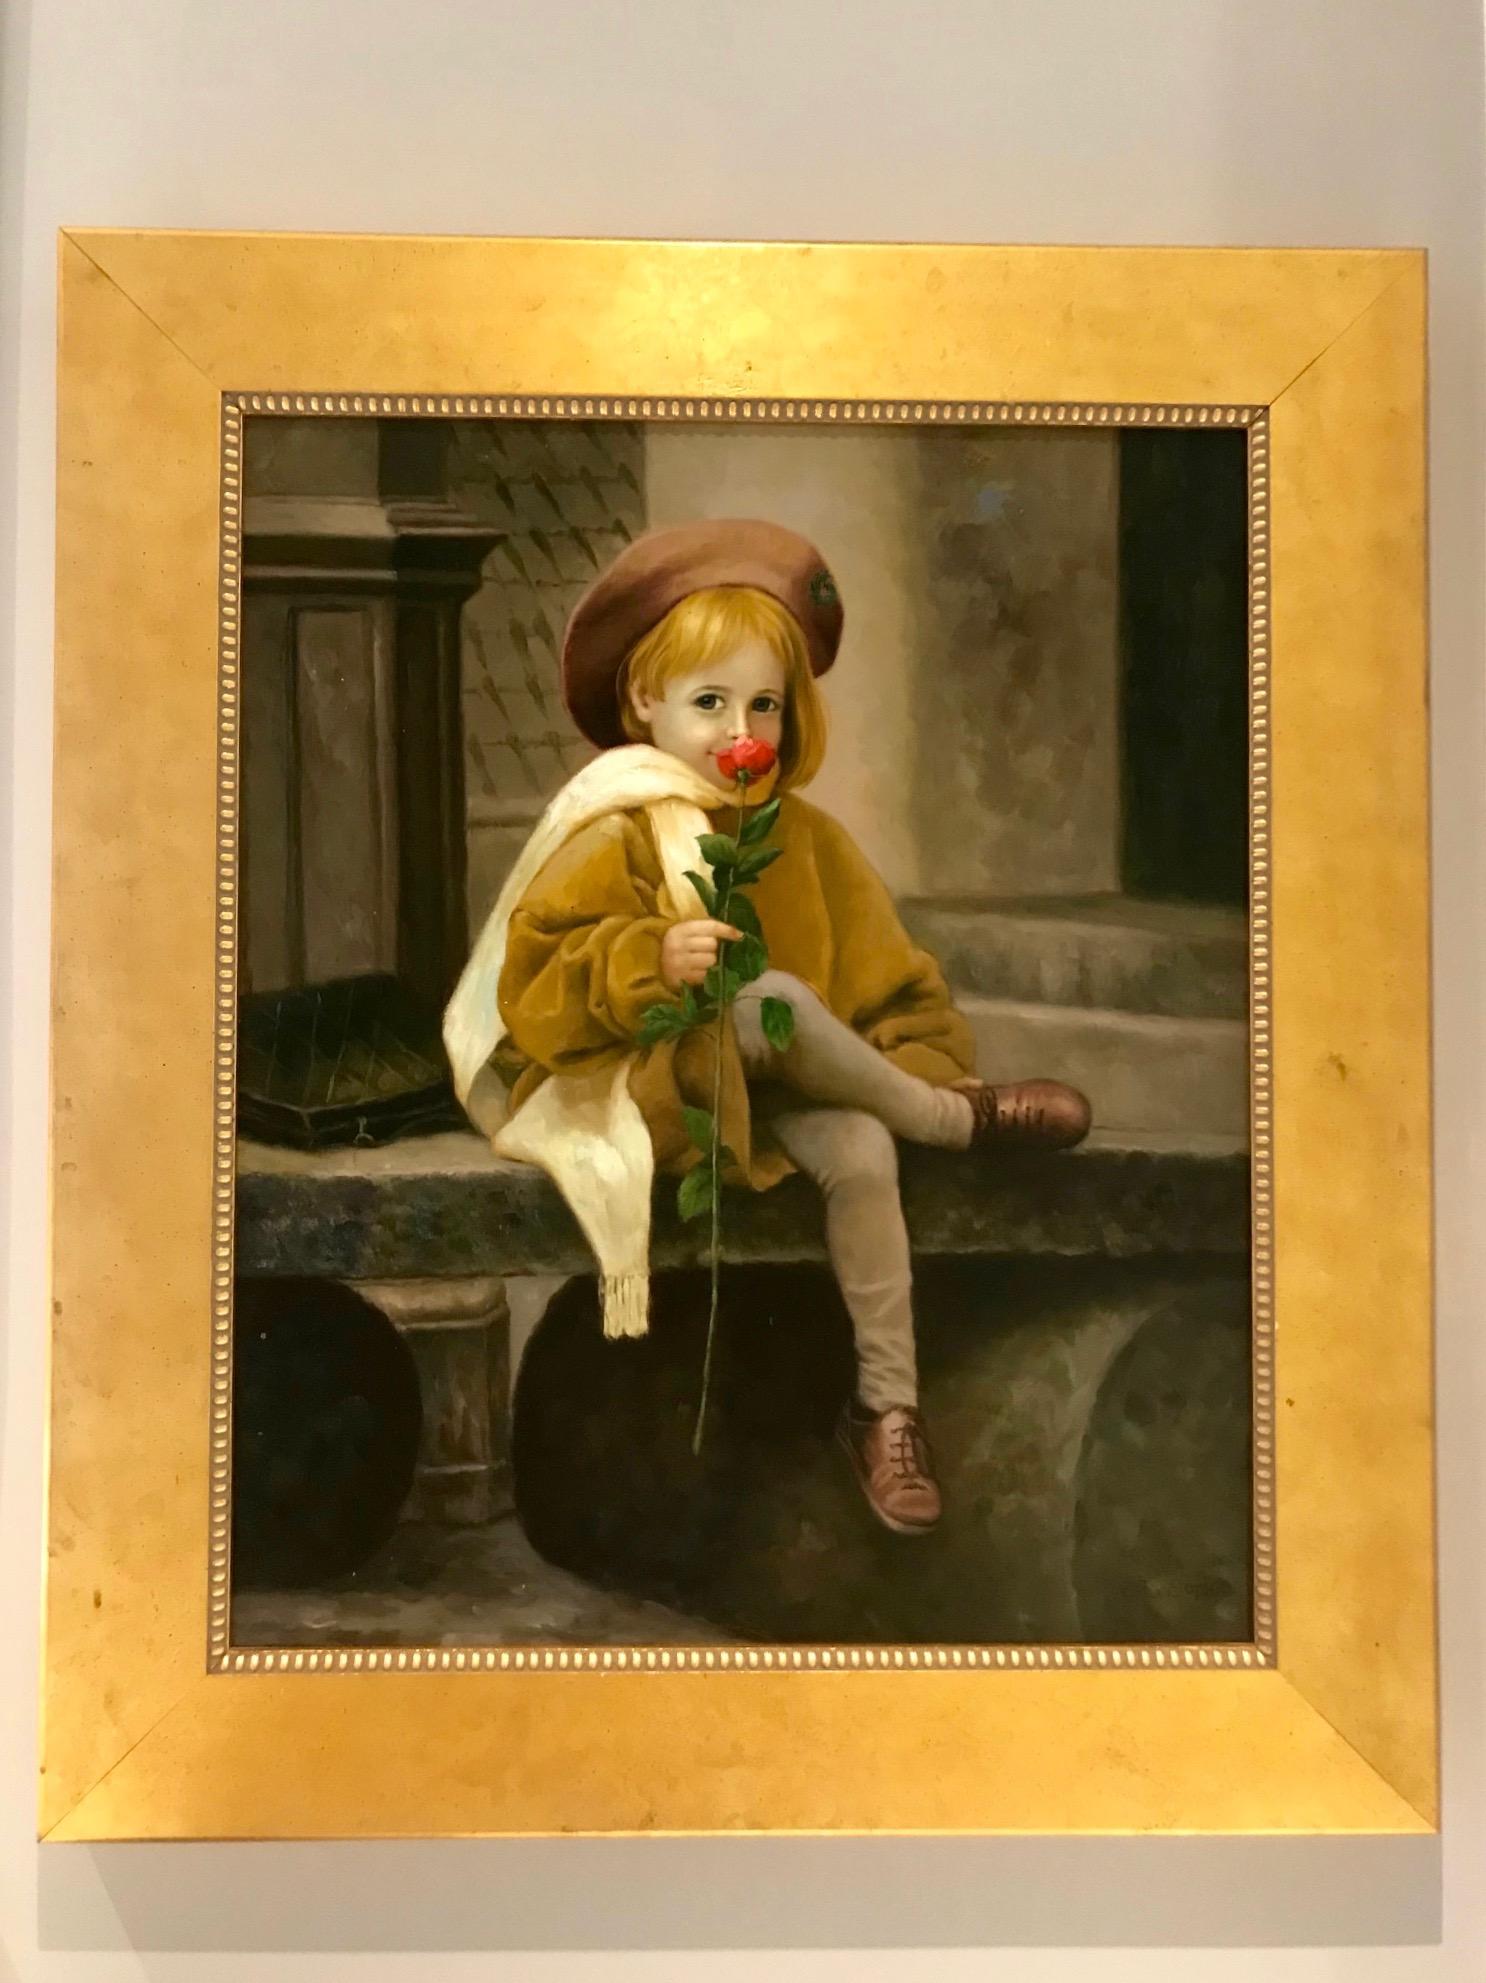 Stunning oil on canvas painting invoking the Aesthetic Movement of the late 19th century, supporting the emphasis of aesthetic values more than social-political themes in fine art. The painting features a child wearing a beret and holding a rose.